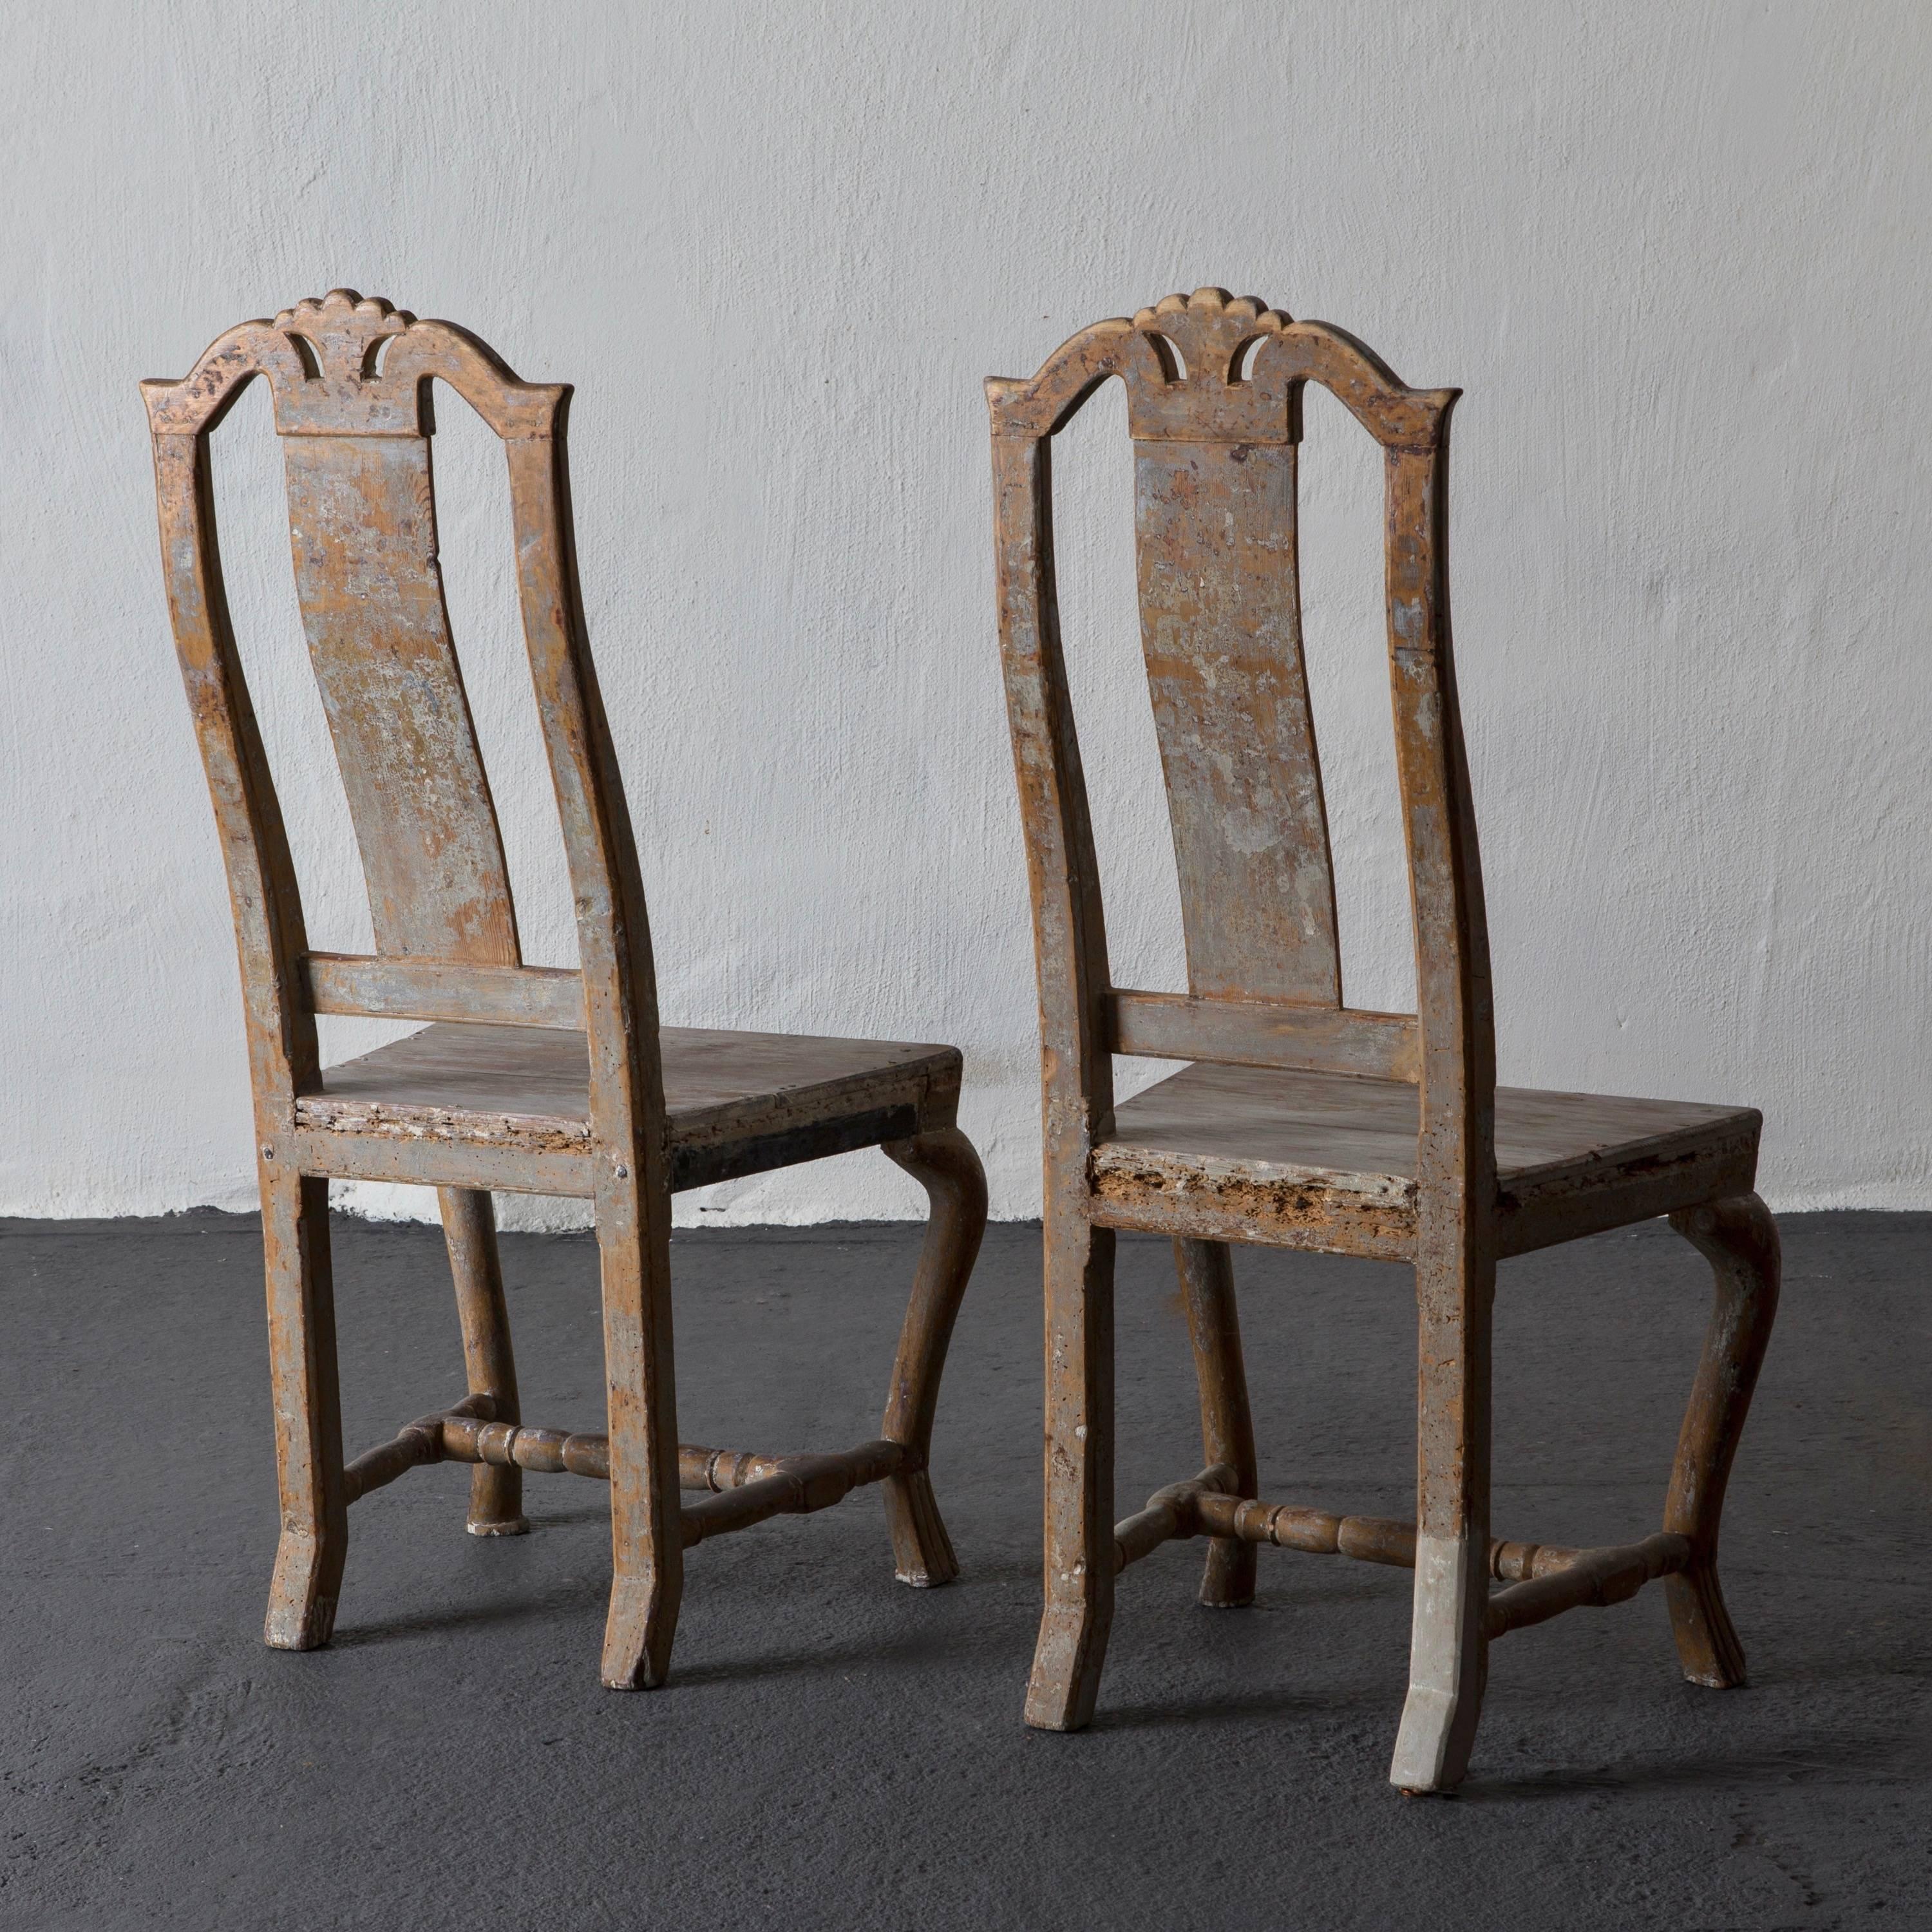 Wood Chairs Side Chairs Swedish Baroque, 18th Century, Sweden